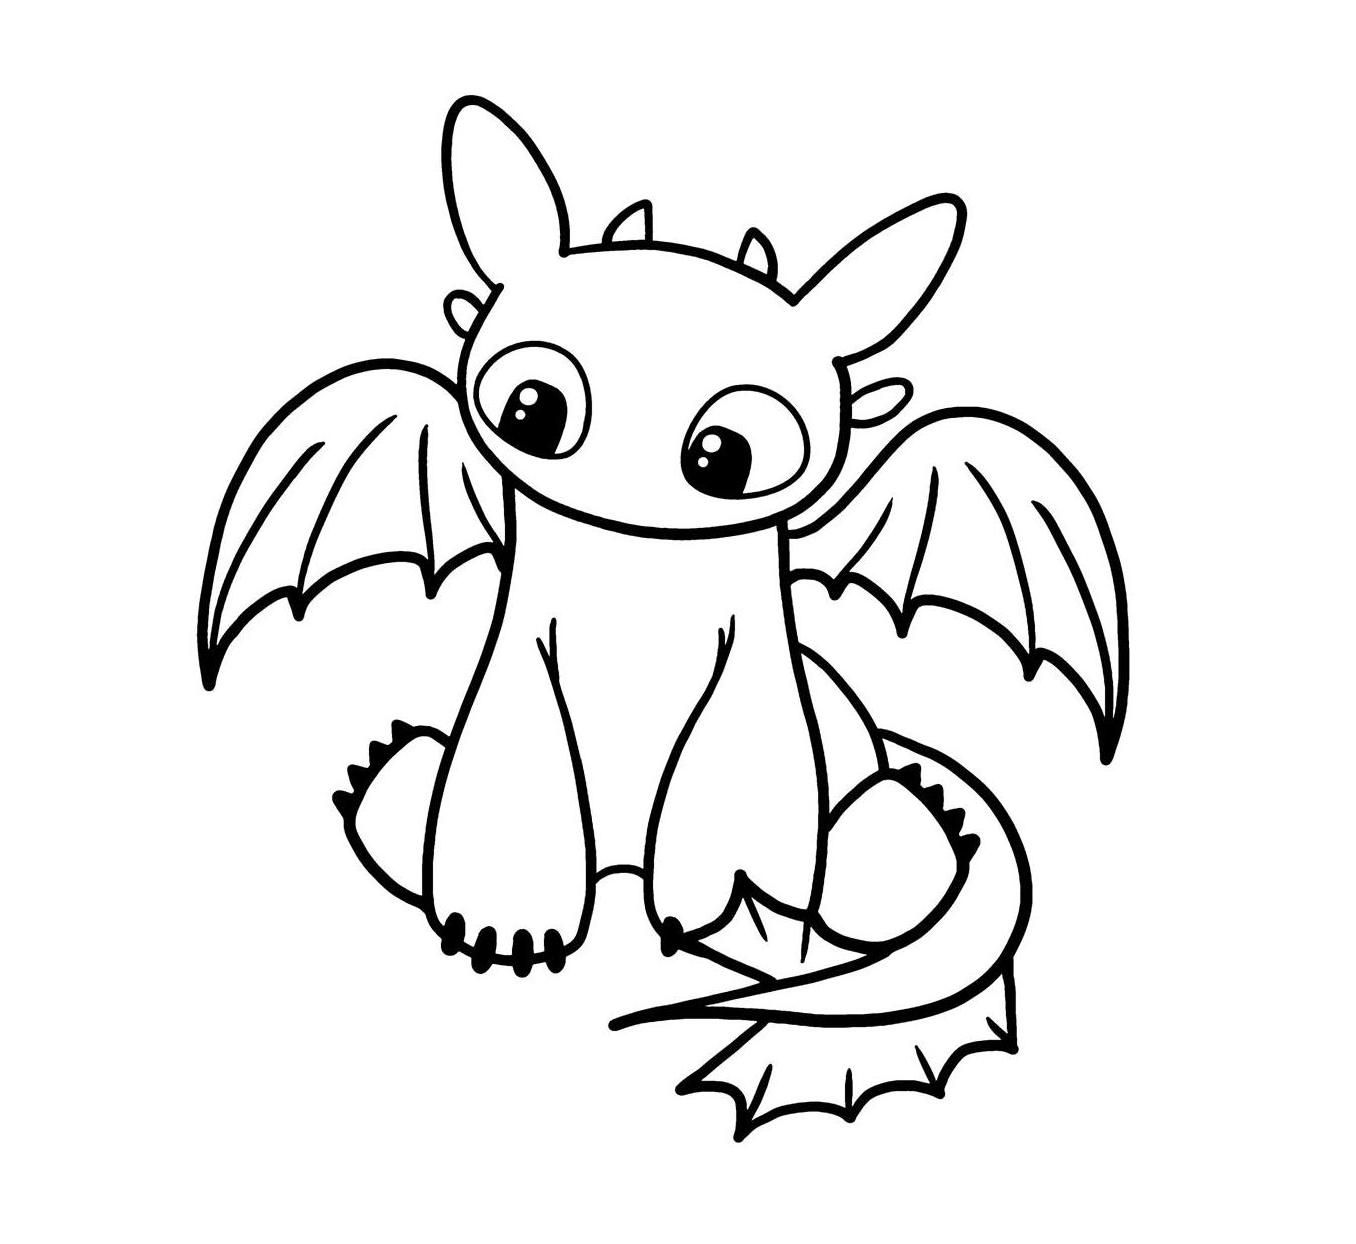 how to train your dragon coloring pages night fury